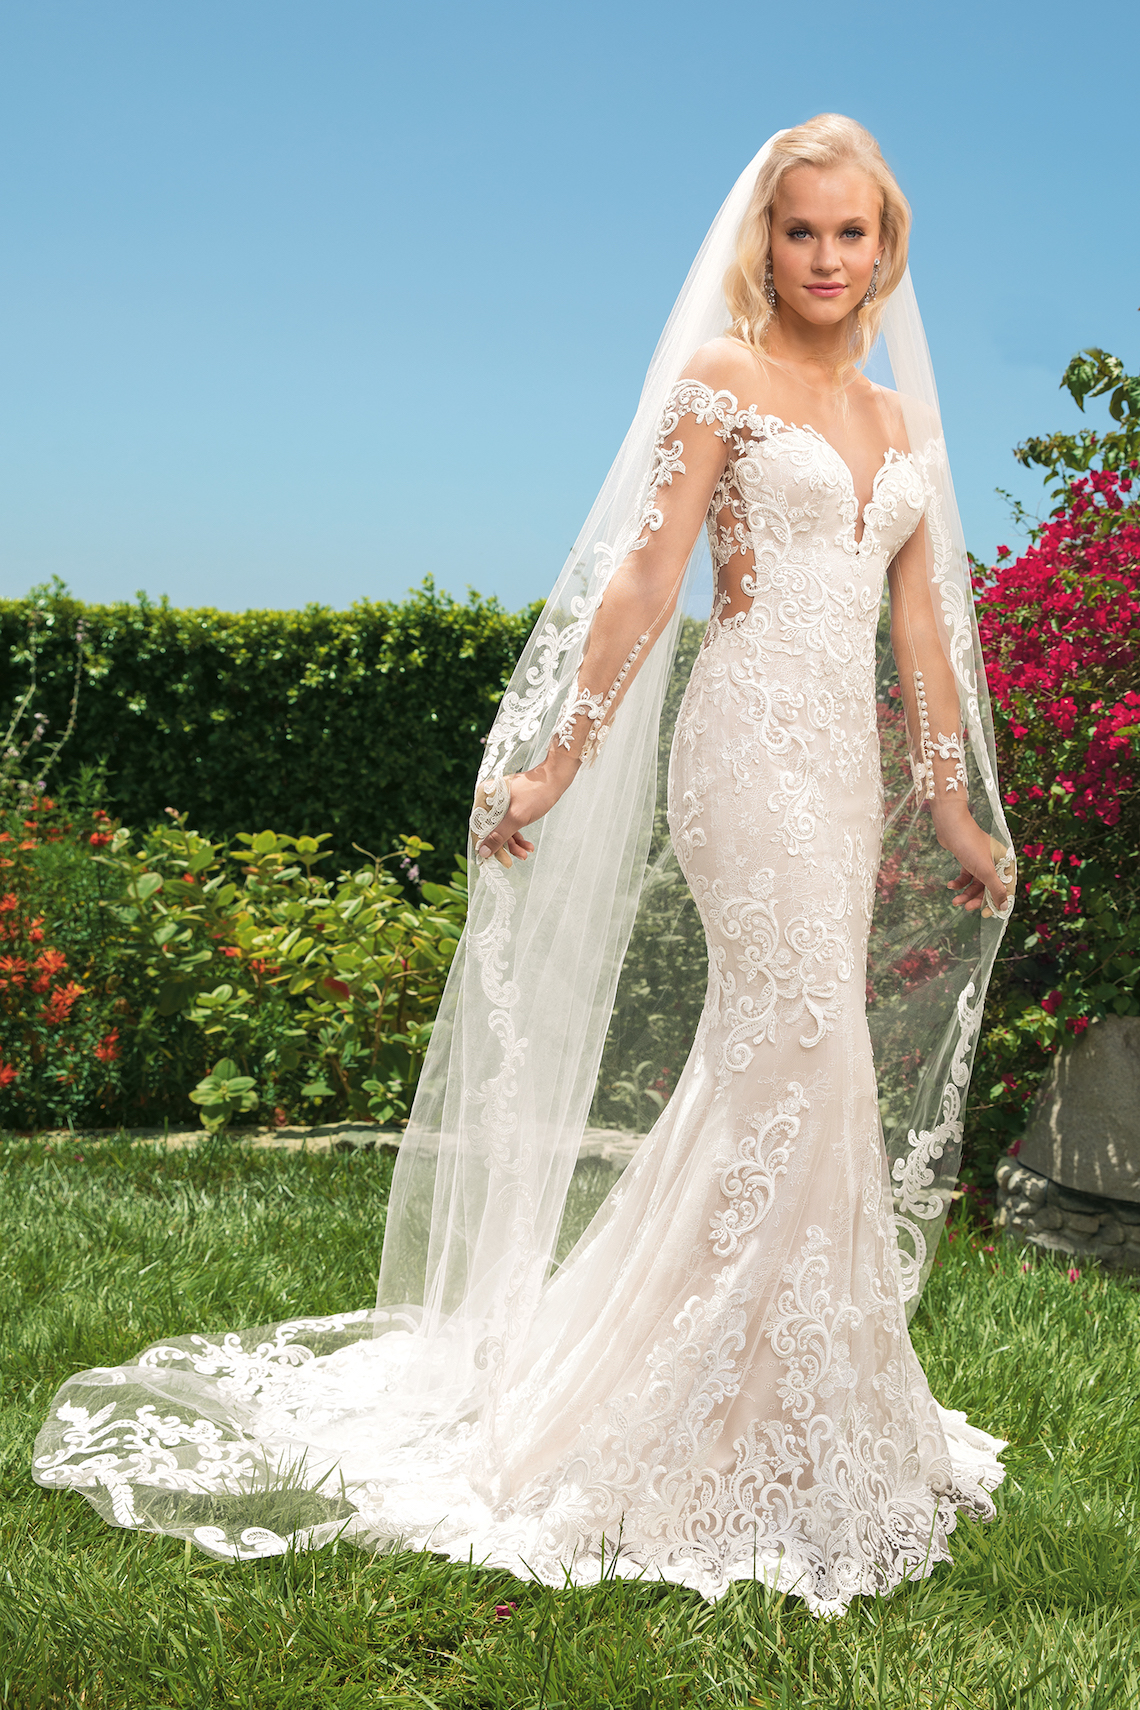 6 Stunning Lace Wedding Dresses By Casablanca Bridal – 2356 Madelyn-FRONT